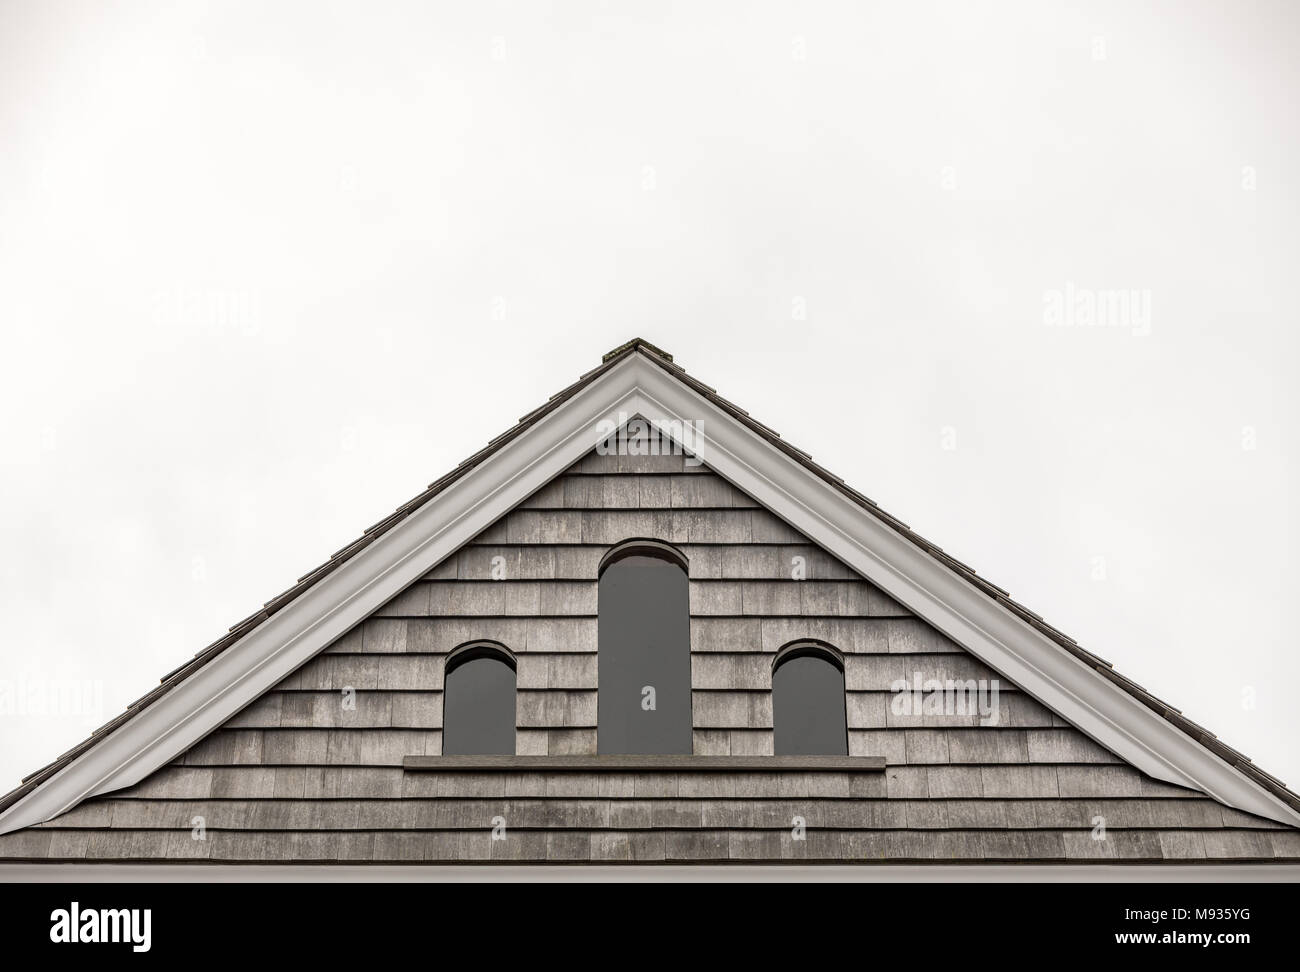 image of a roof and attic windows shaped with arches Stock Photo